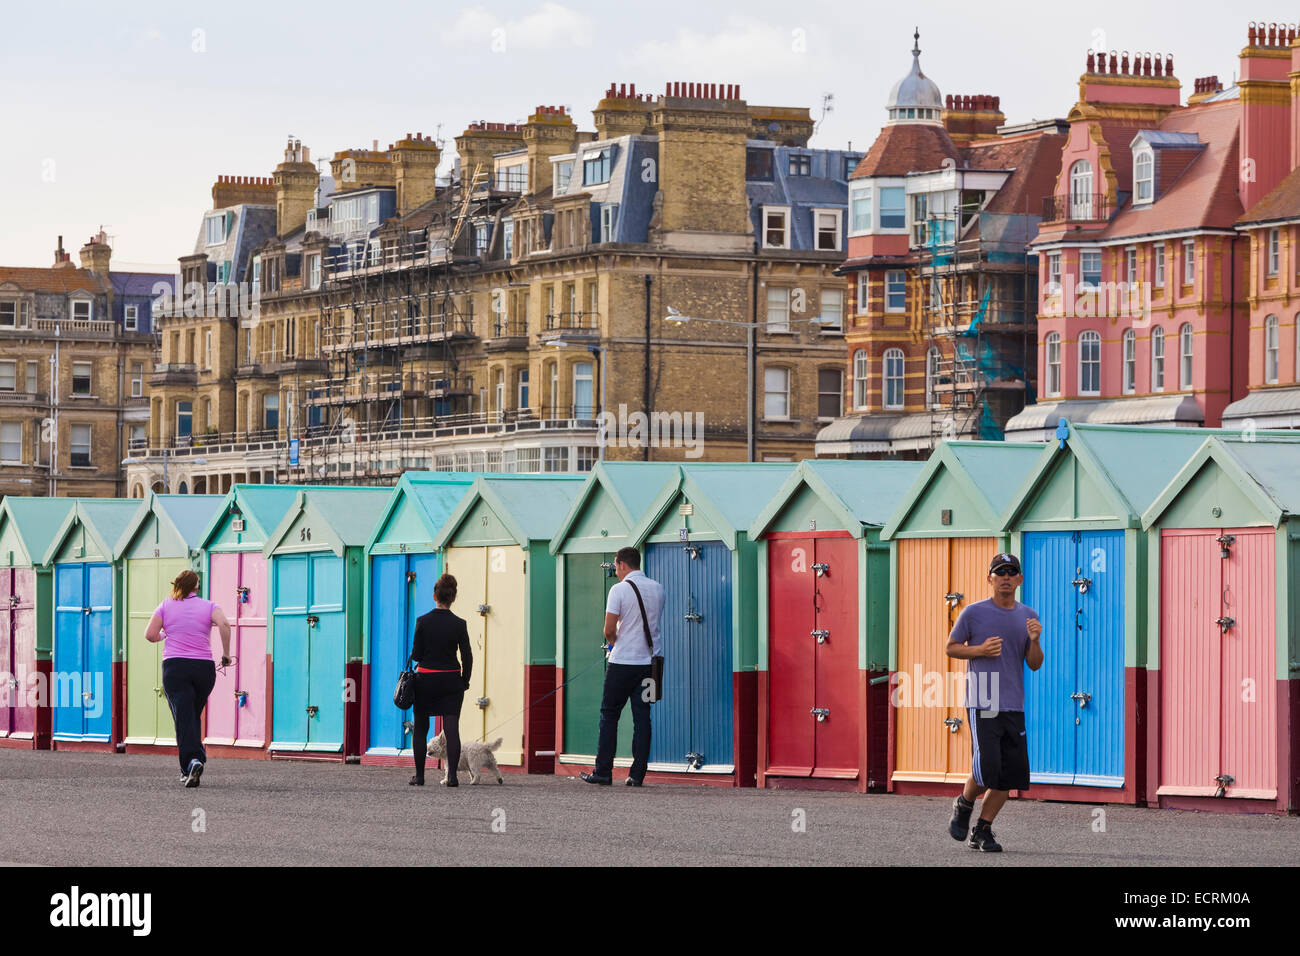 COLORFUL BATHING HUTS AT THE SEAFRONT, BRIGHTON, SEASIDE RESORT, COASTAL RESORT, SUSSEX, ENGLAND, GREAT BRITAIN Stock Photo